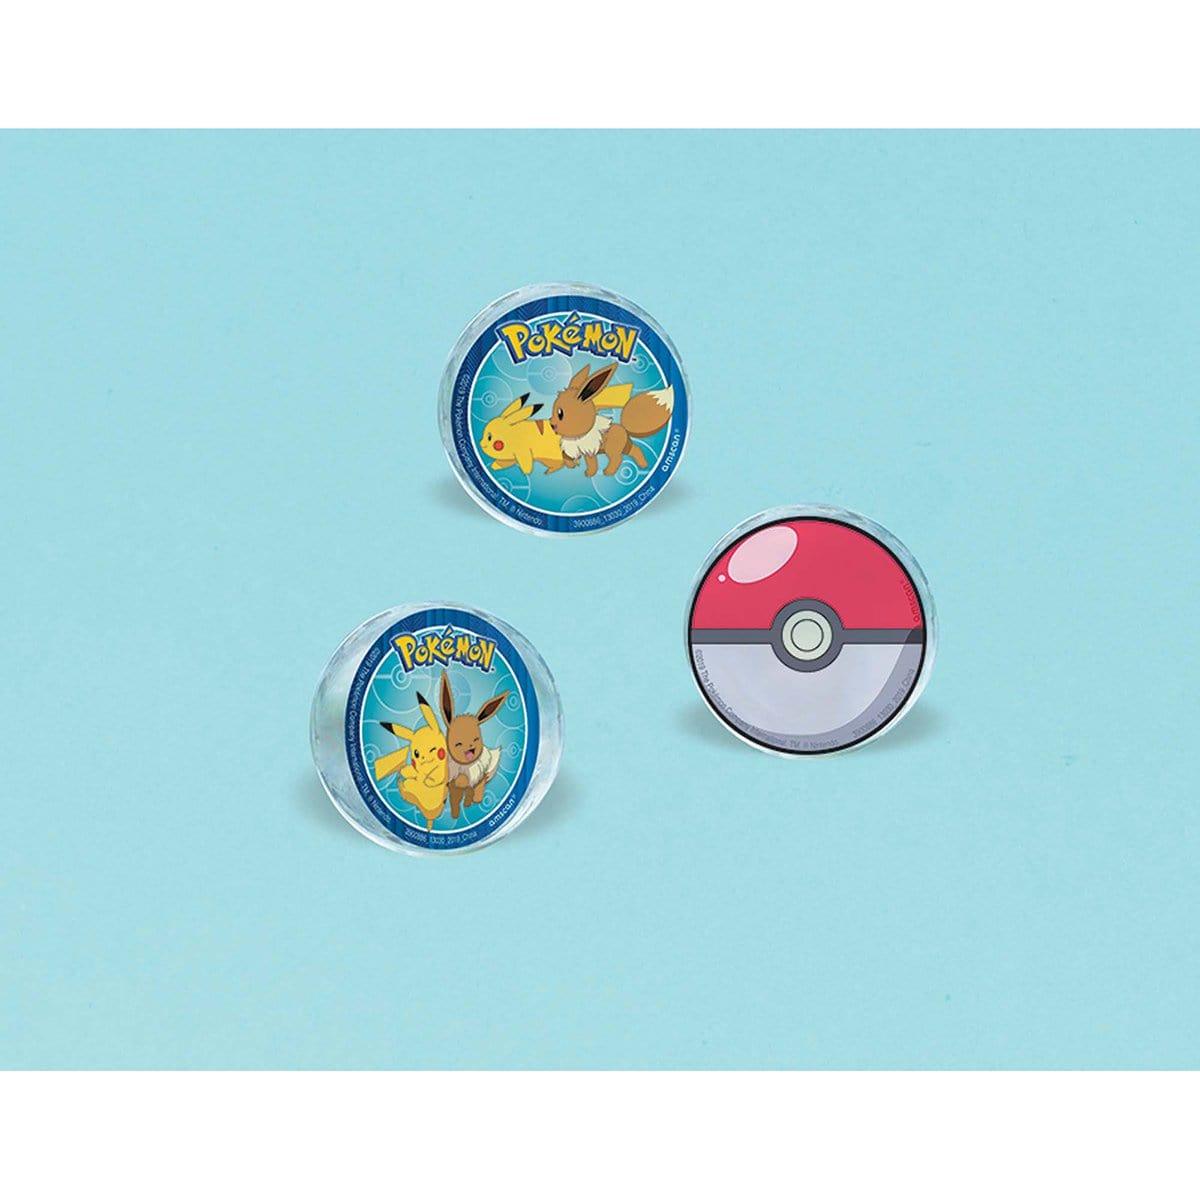 Buy Kids Birthday Pokémon bounce balls, 4 per package sold at Party Expert